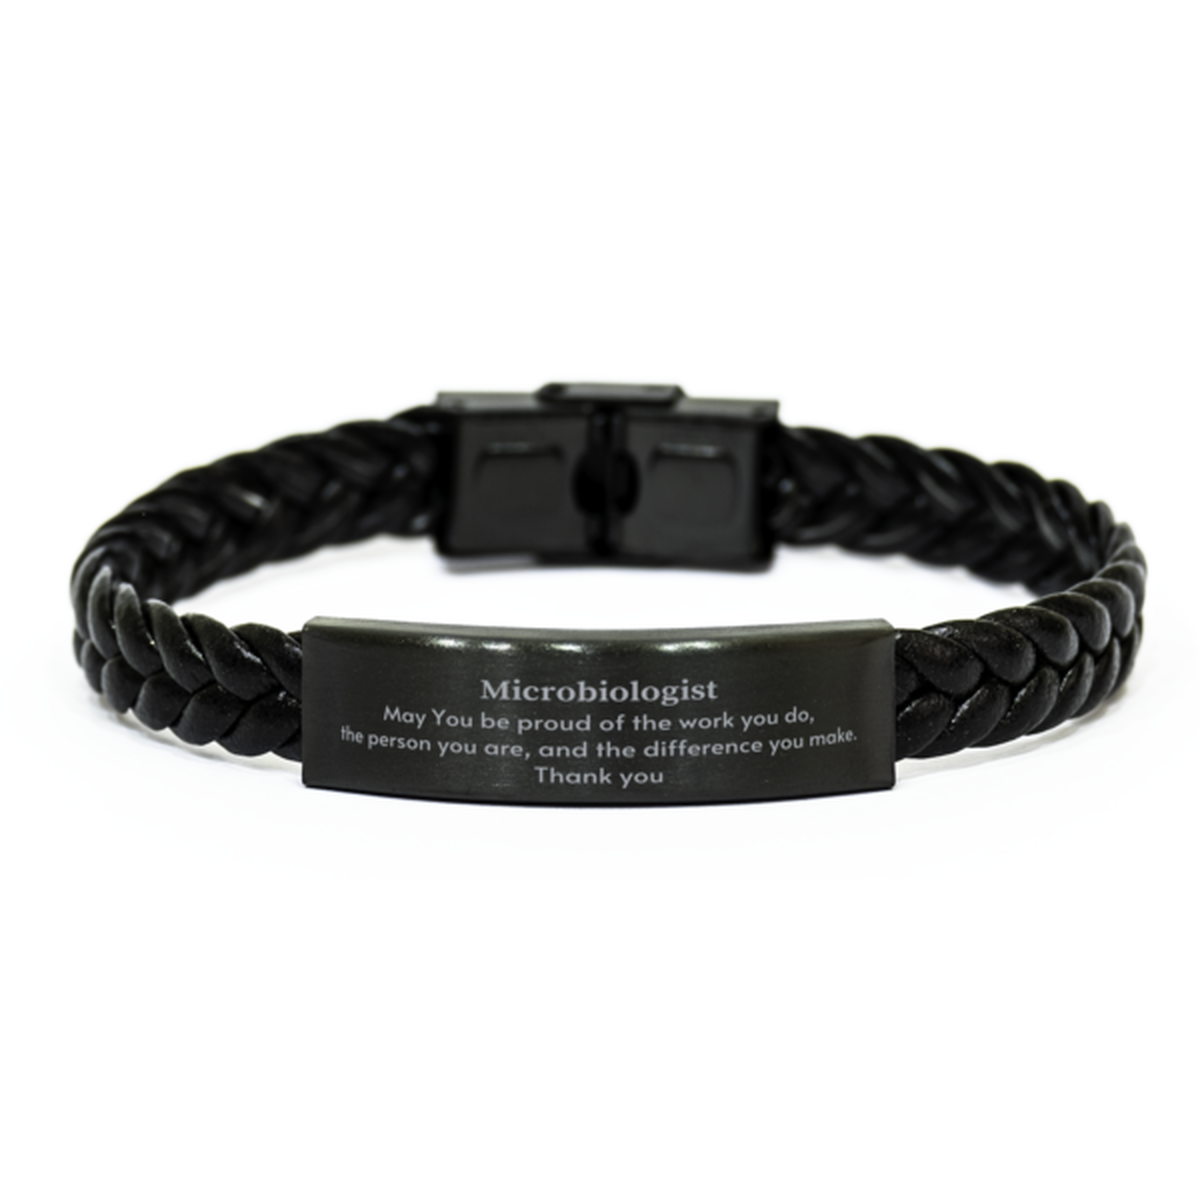 Heartwarming Braided Leather Bracelet Retirement Coworkers Gifts for Microbiologist, Microbiologist May You be proud of the work you do, the person you are Gifts for Boss Men Women Friends